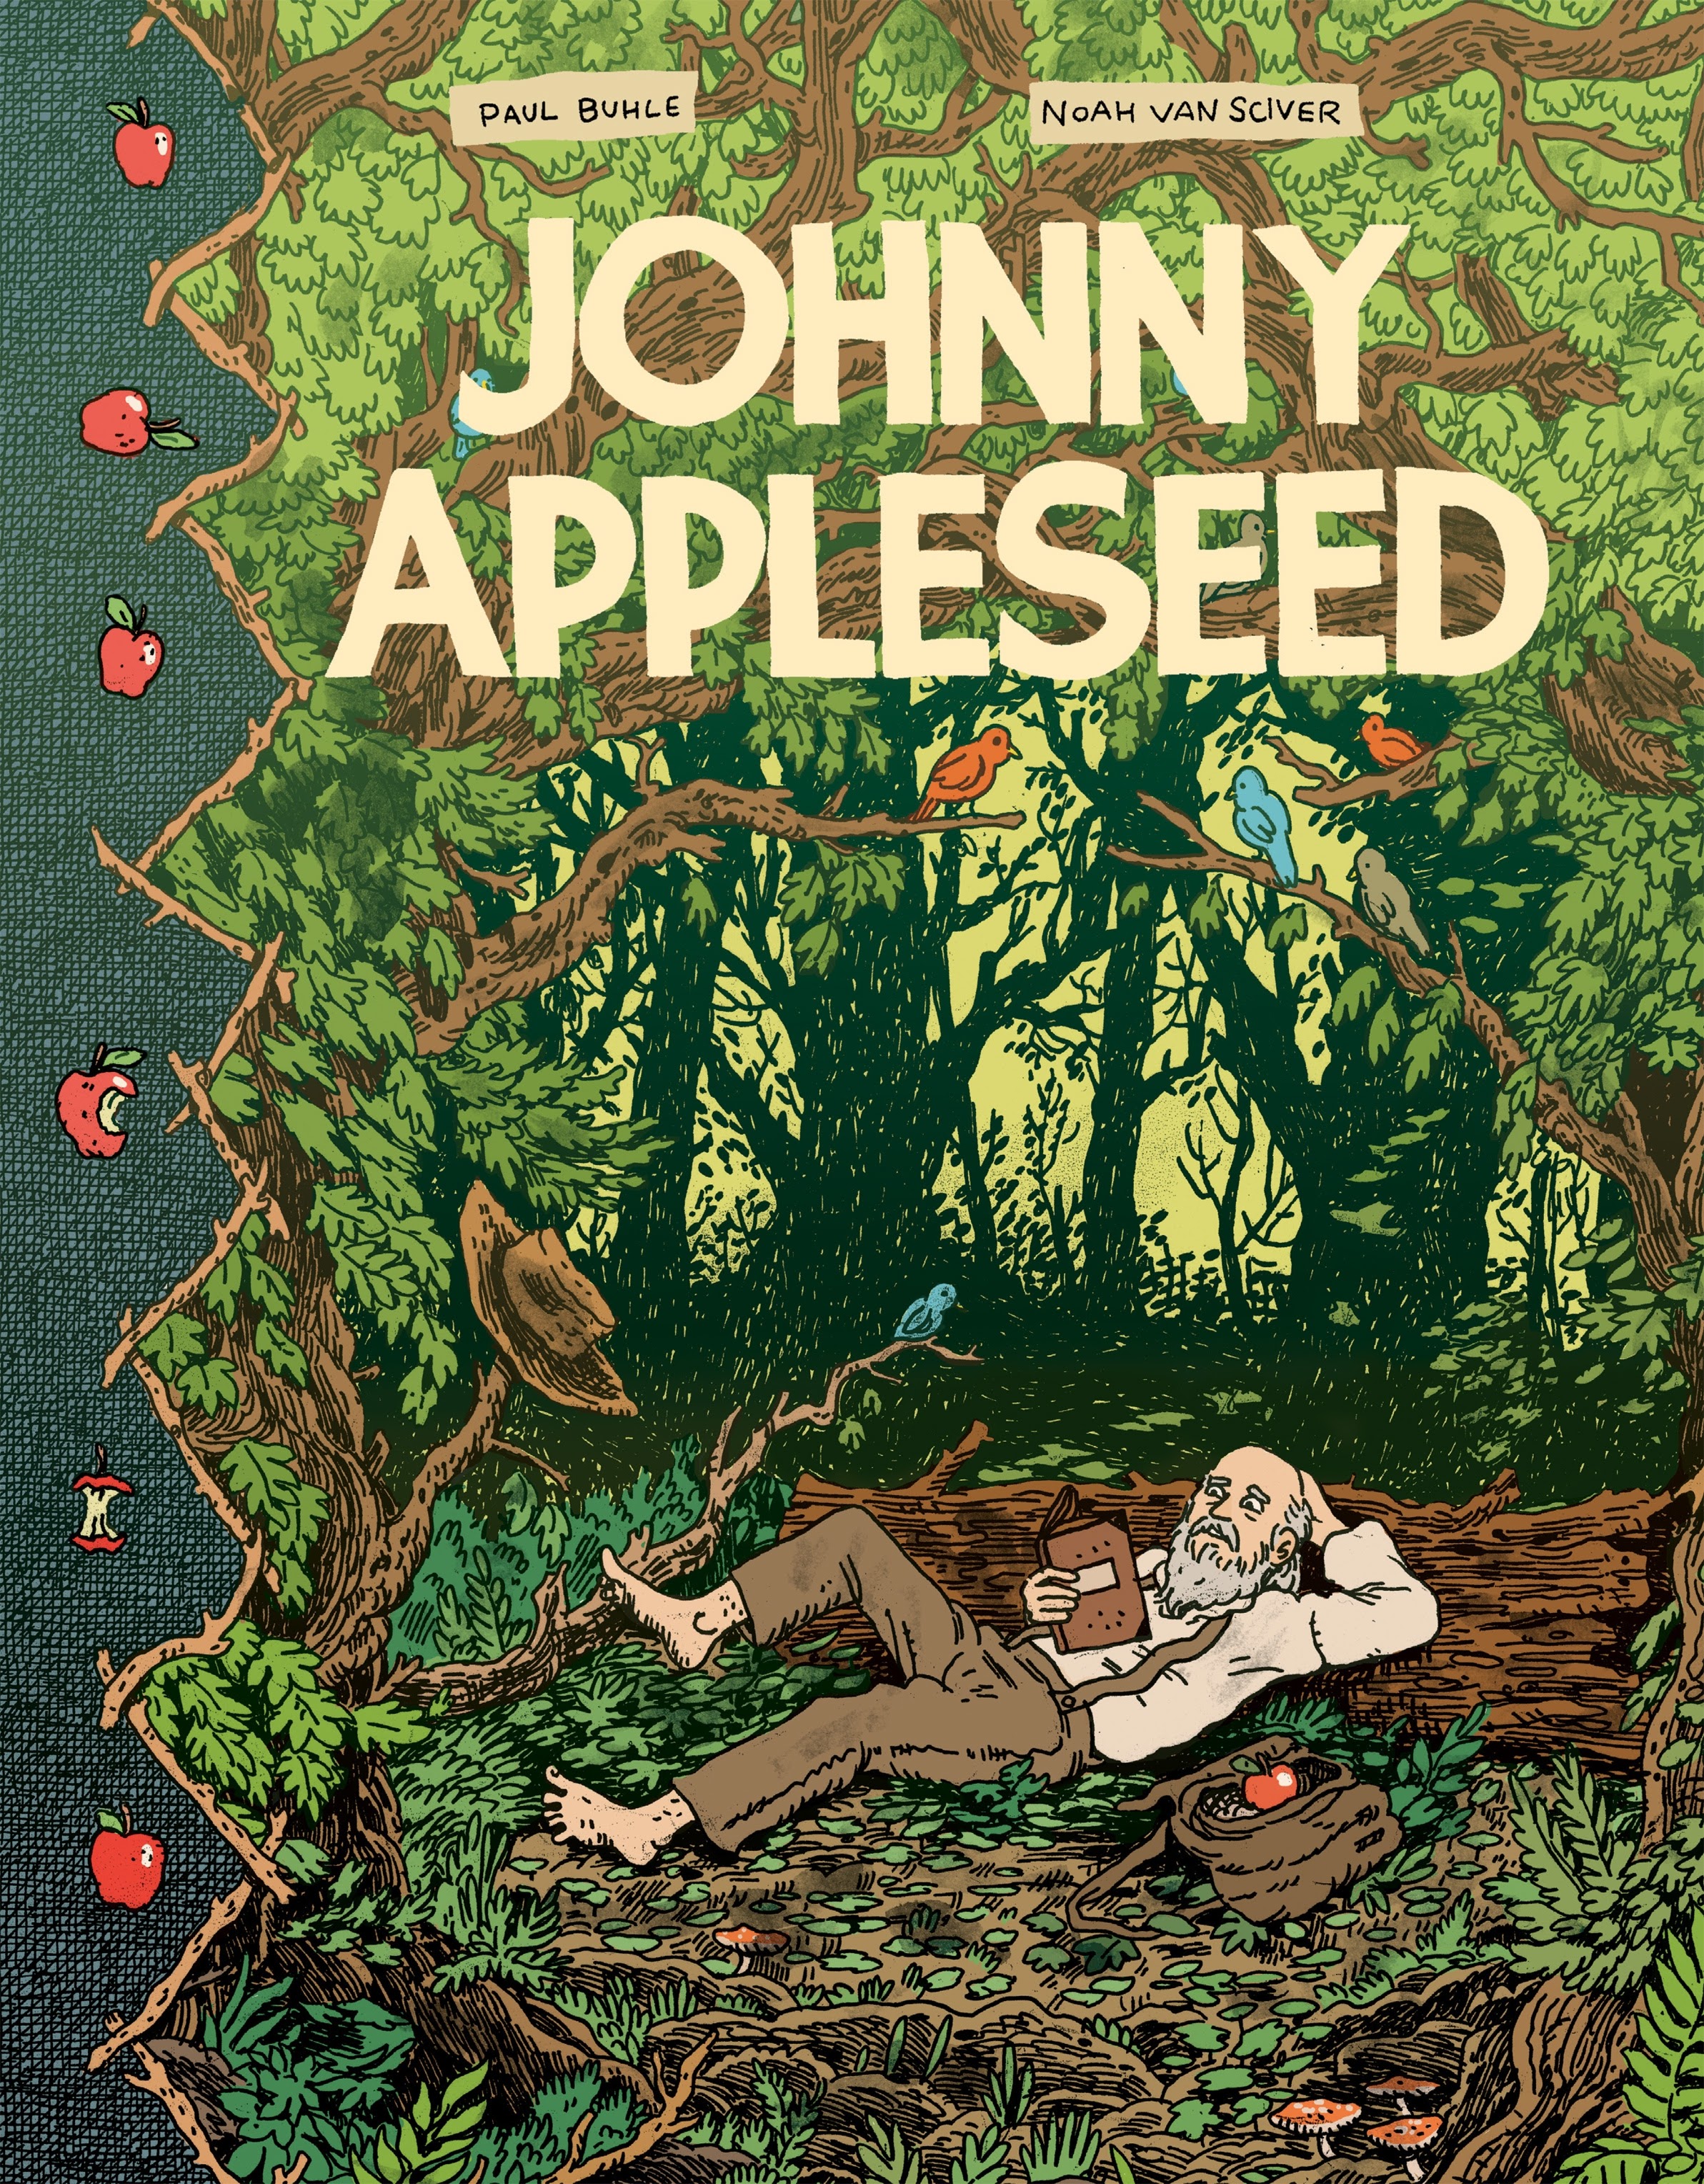 Read online Johnny Appleseed comic -  Issue # TPB - 1